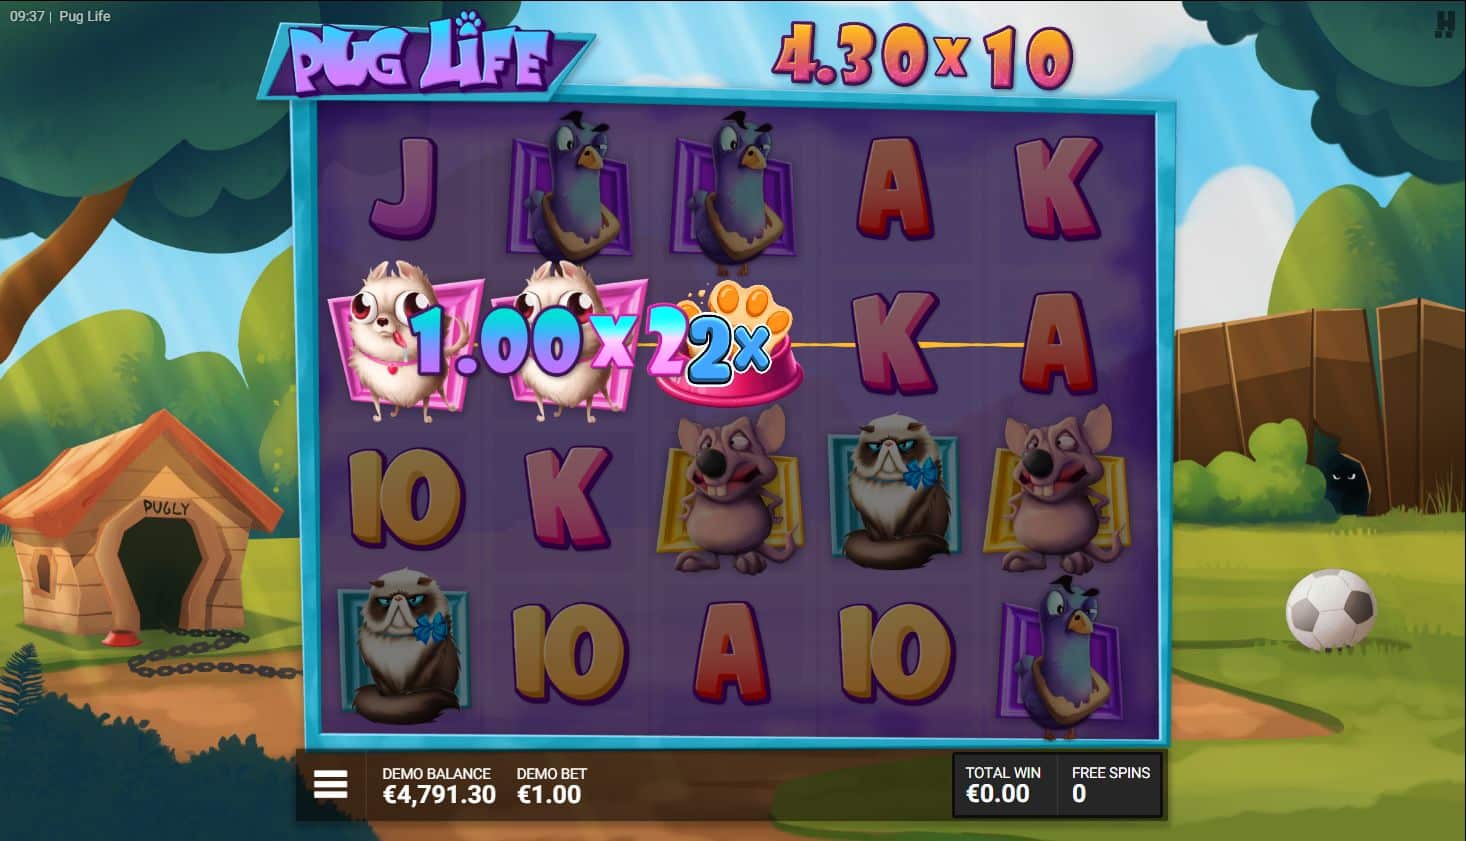 Pug Life The Dawg's Den Free Spins